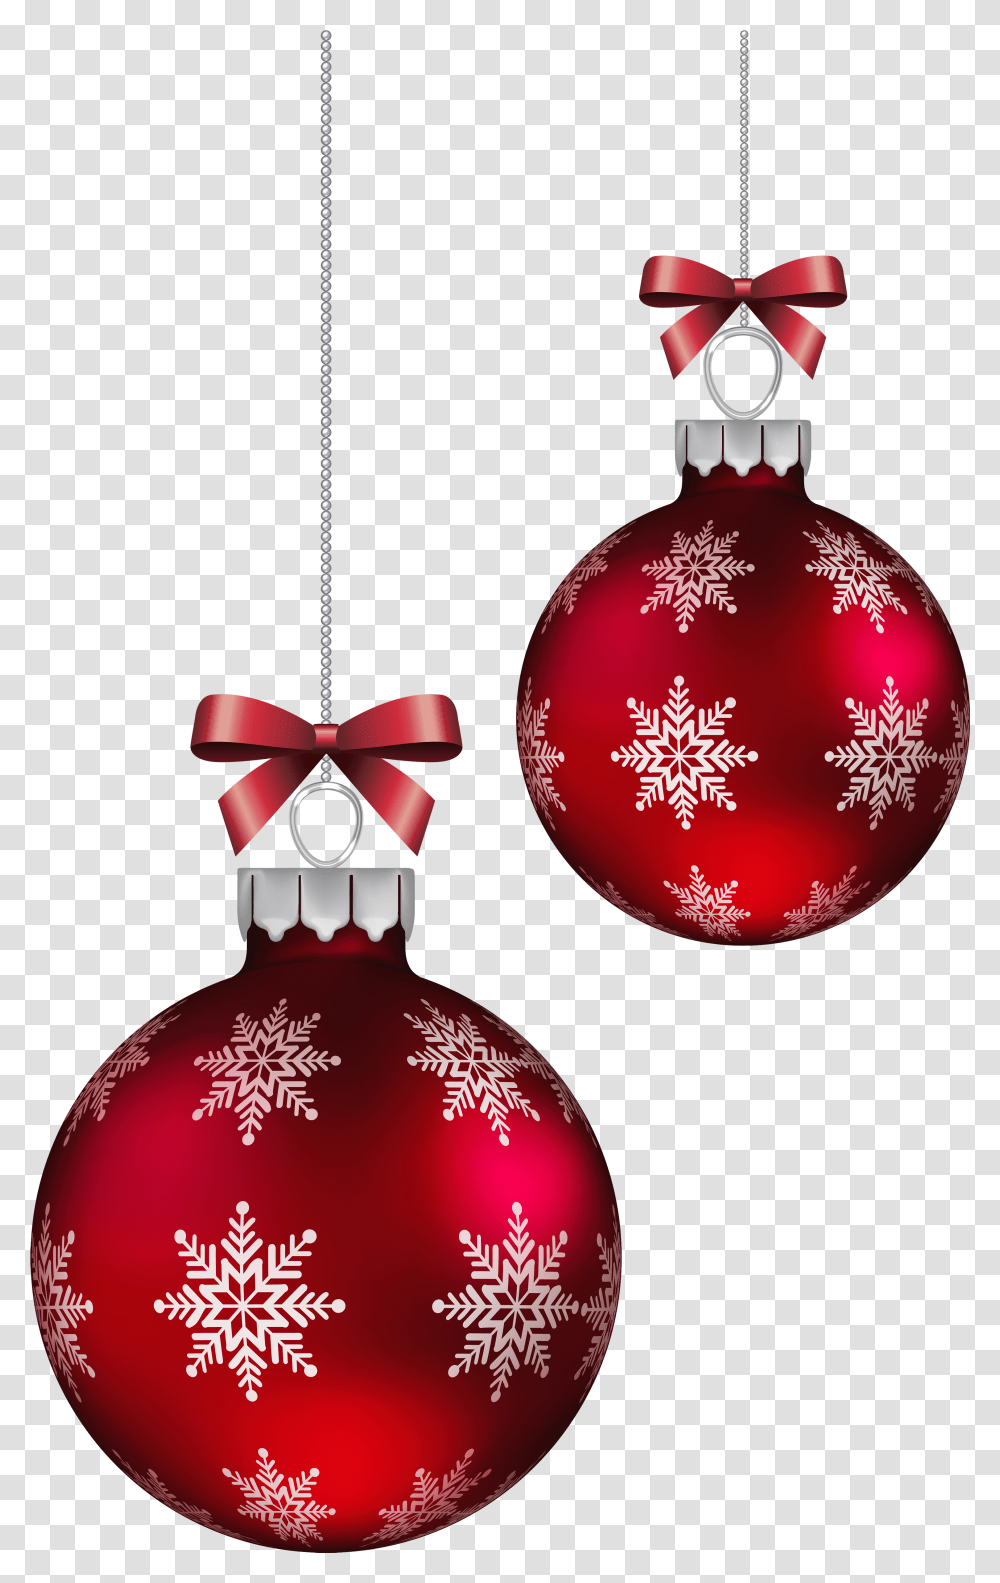 Christmas Ball Clipart Christmas Decorations Background, Ornament, Tree, Plant, Home Decor Transparent Png